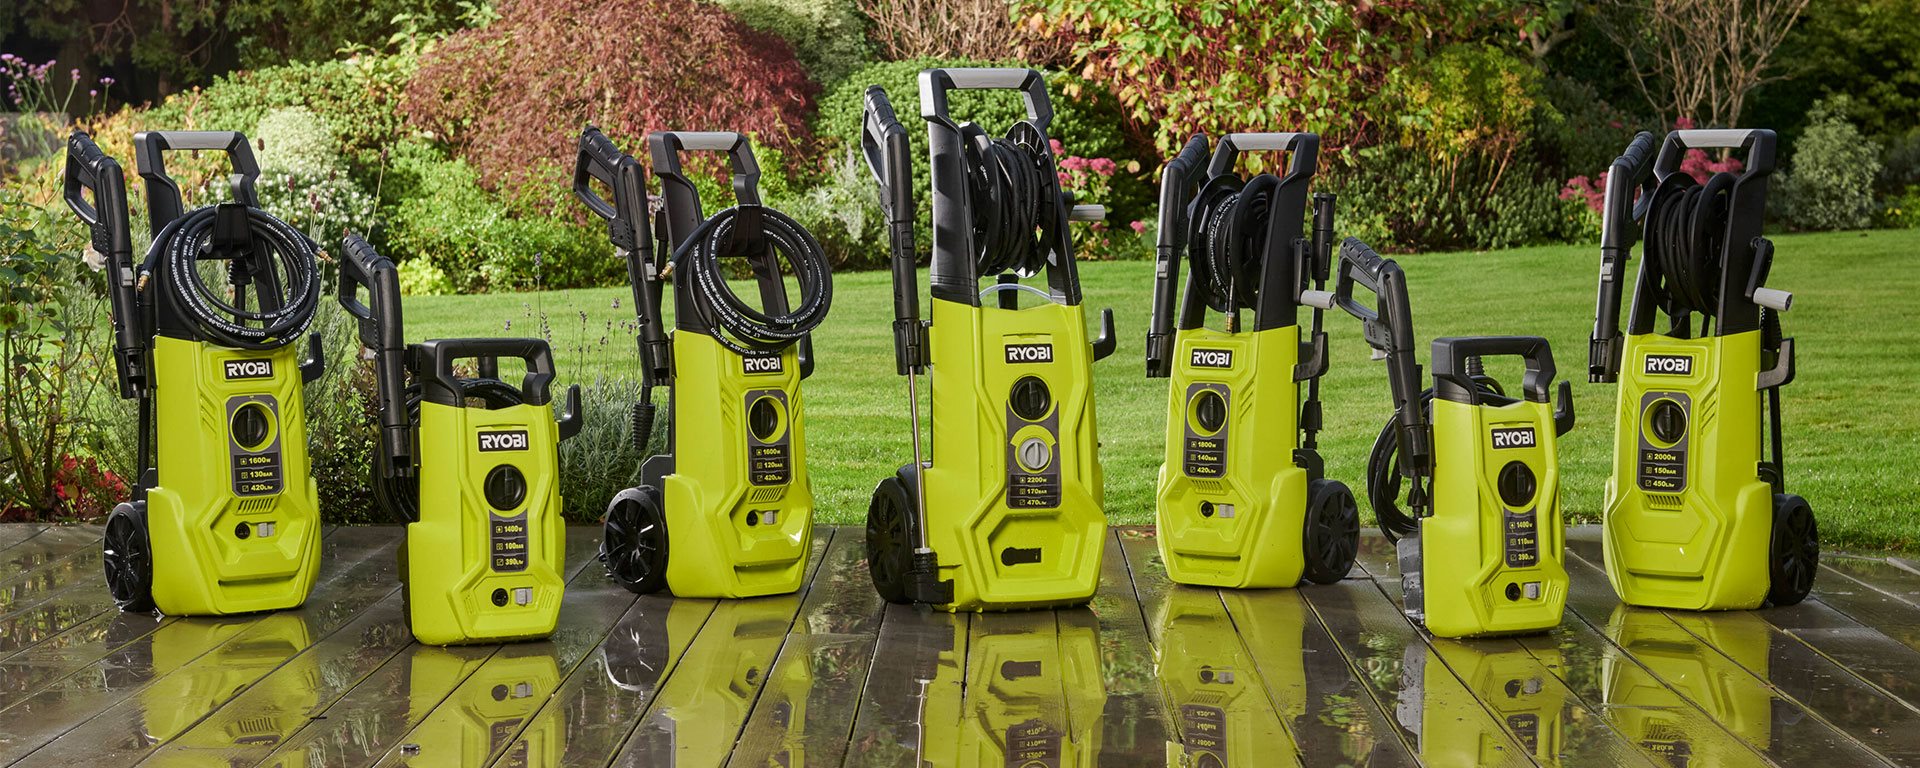 Which is the best pressure washer to buy?